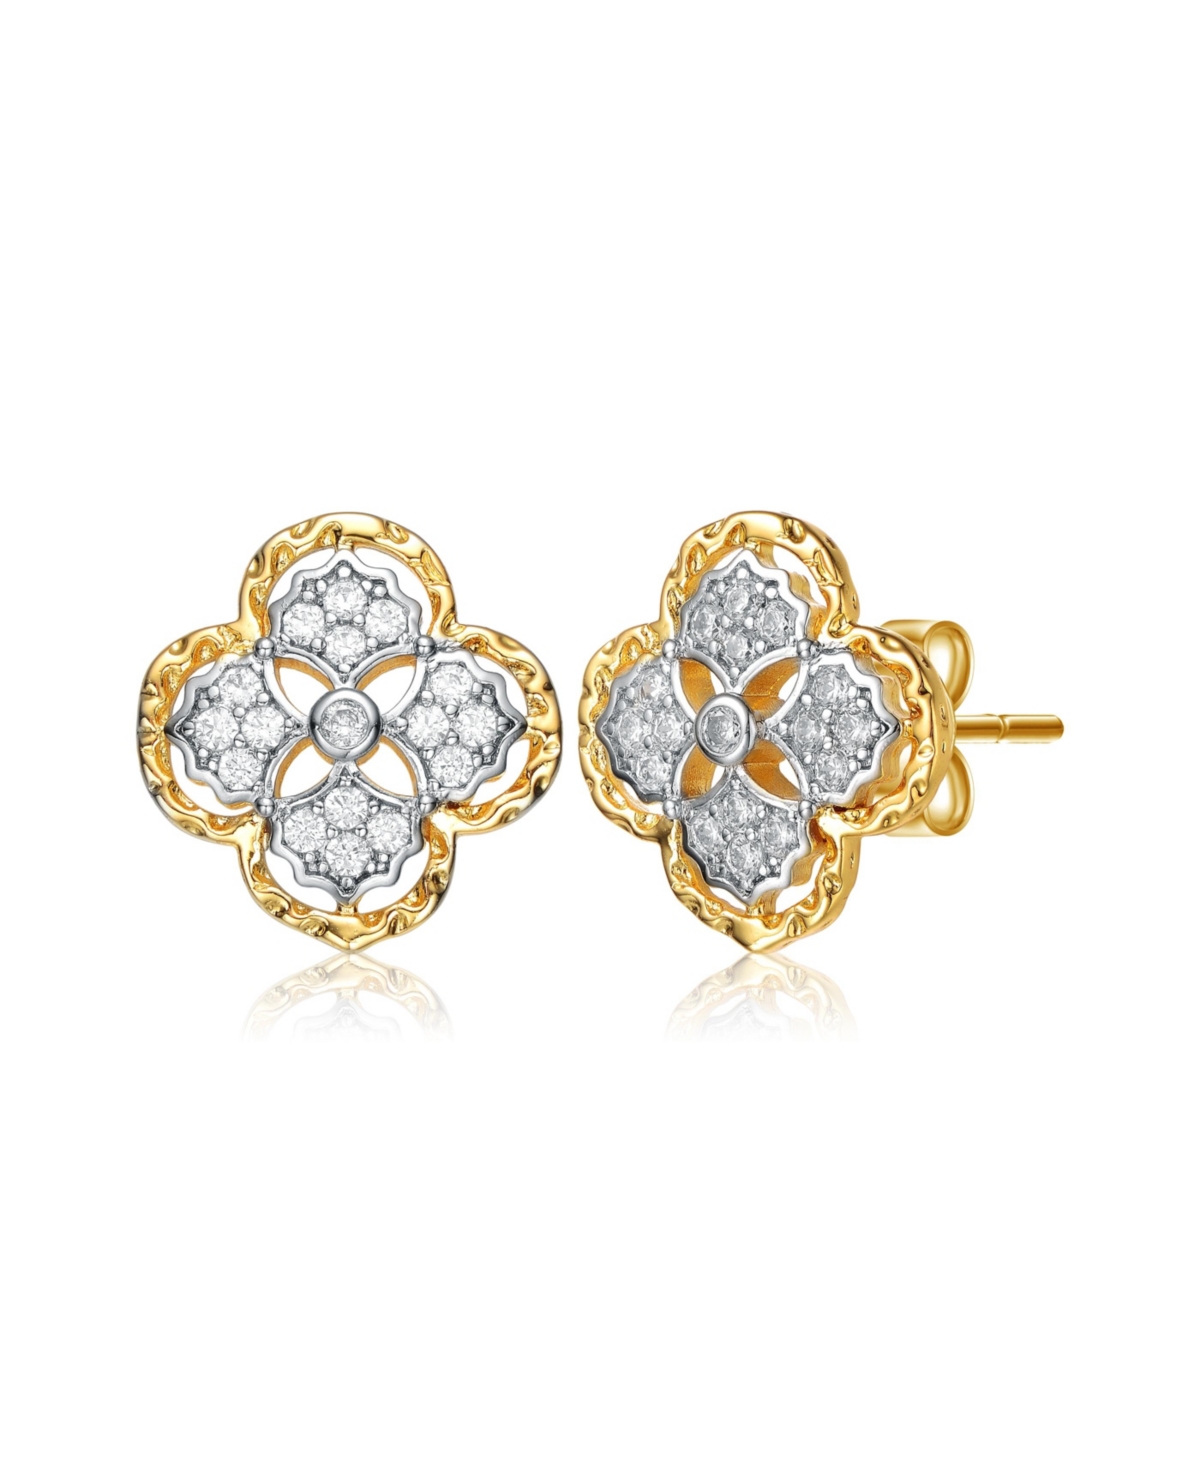 RACHEL GLAUBER CLASSY 14K GOLD PLATED AND CUBIC ZIRCONIA FLORAL STUD EARRINGS